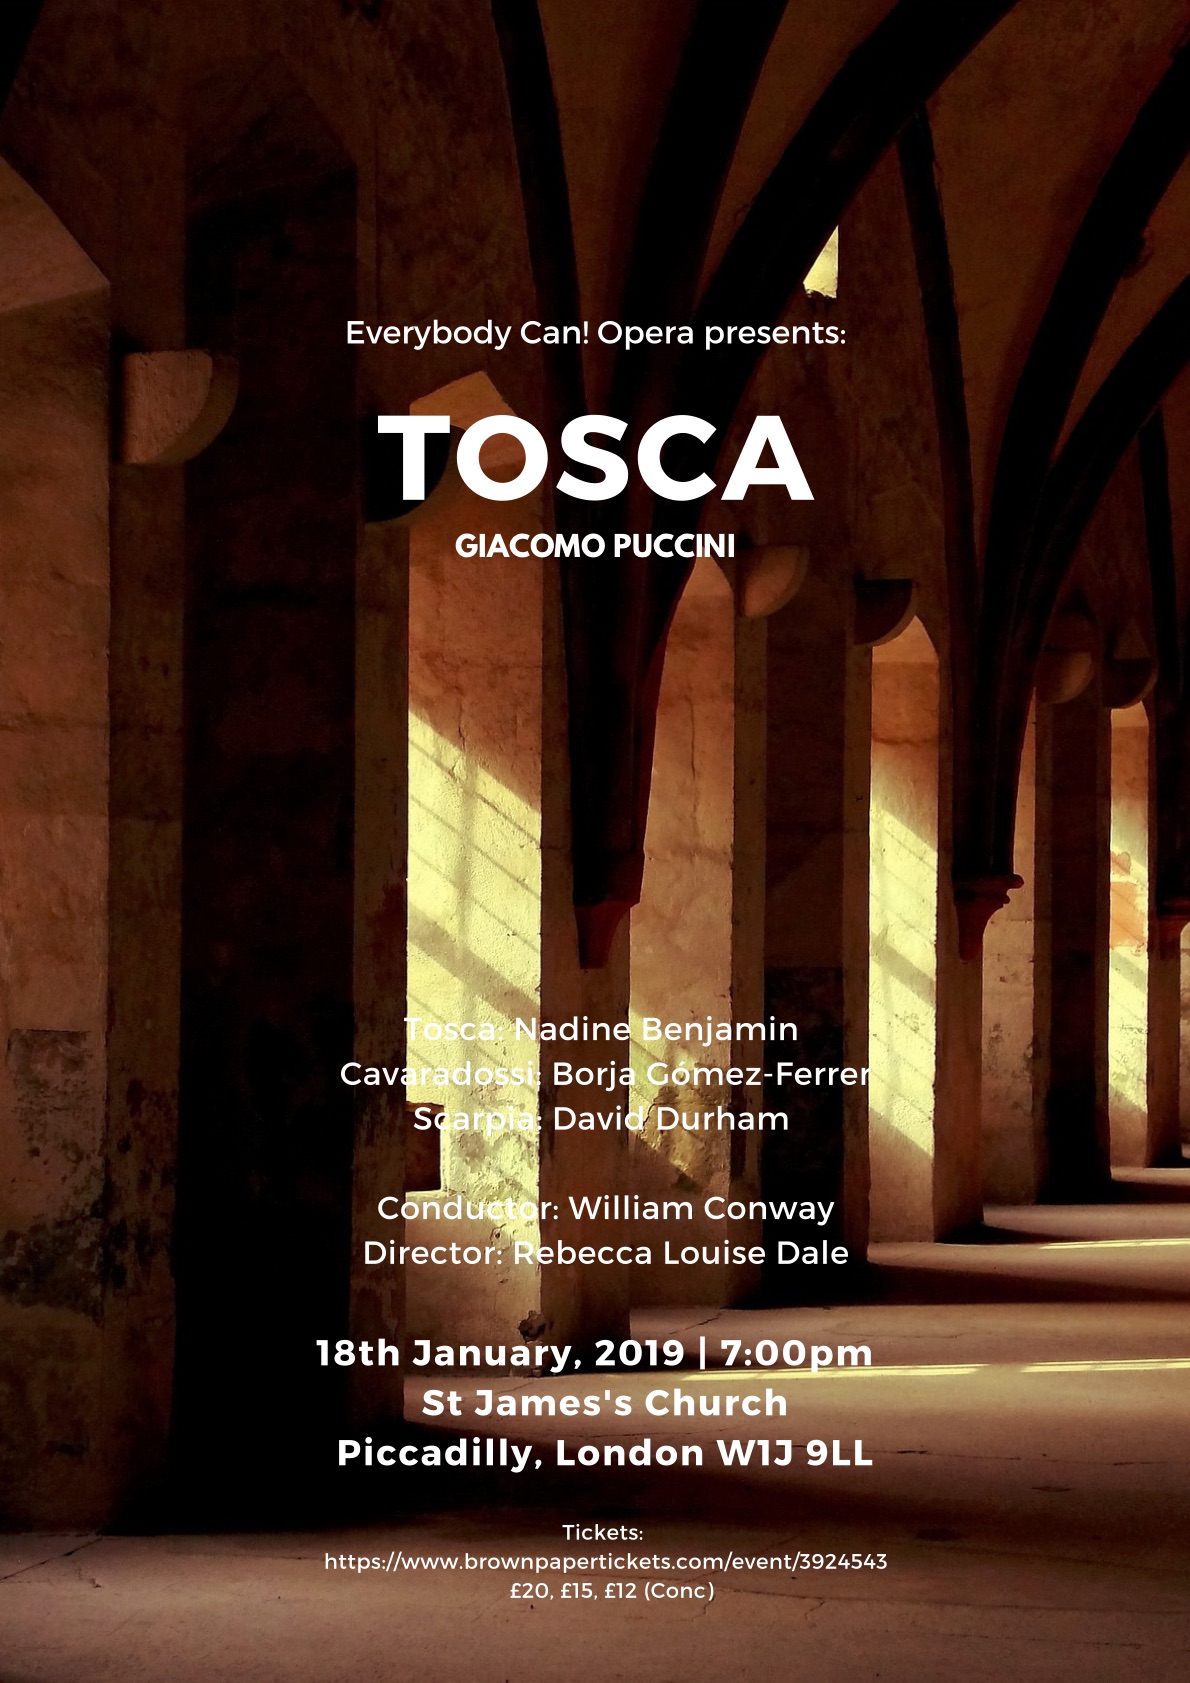 Everybody Can! Opera - Tosca